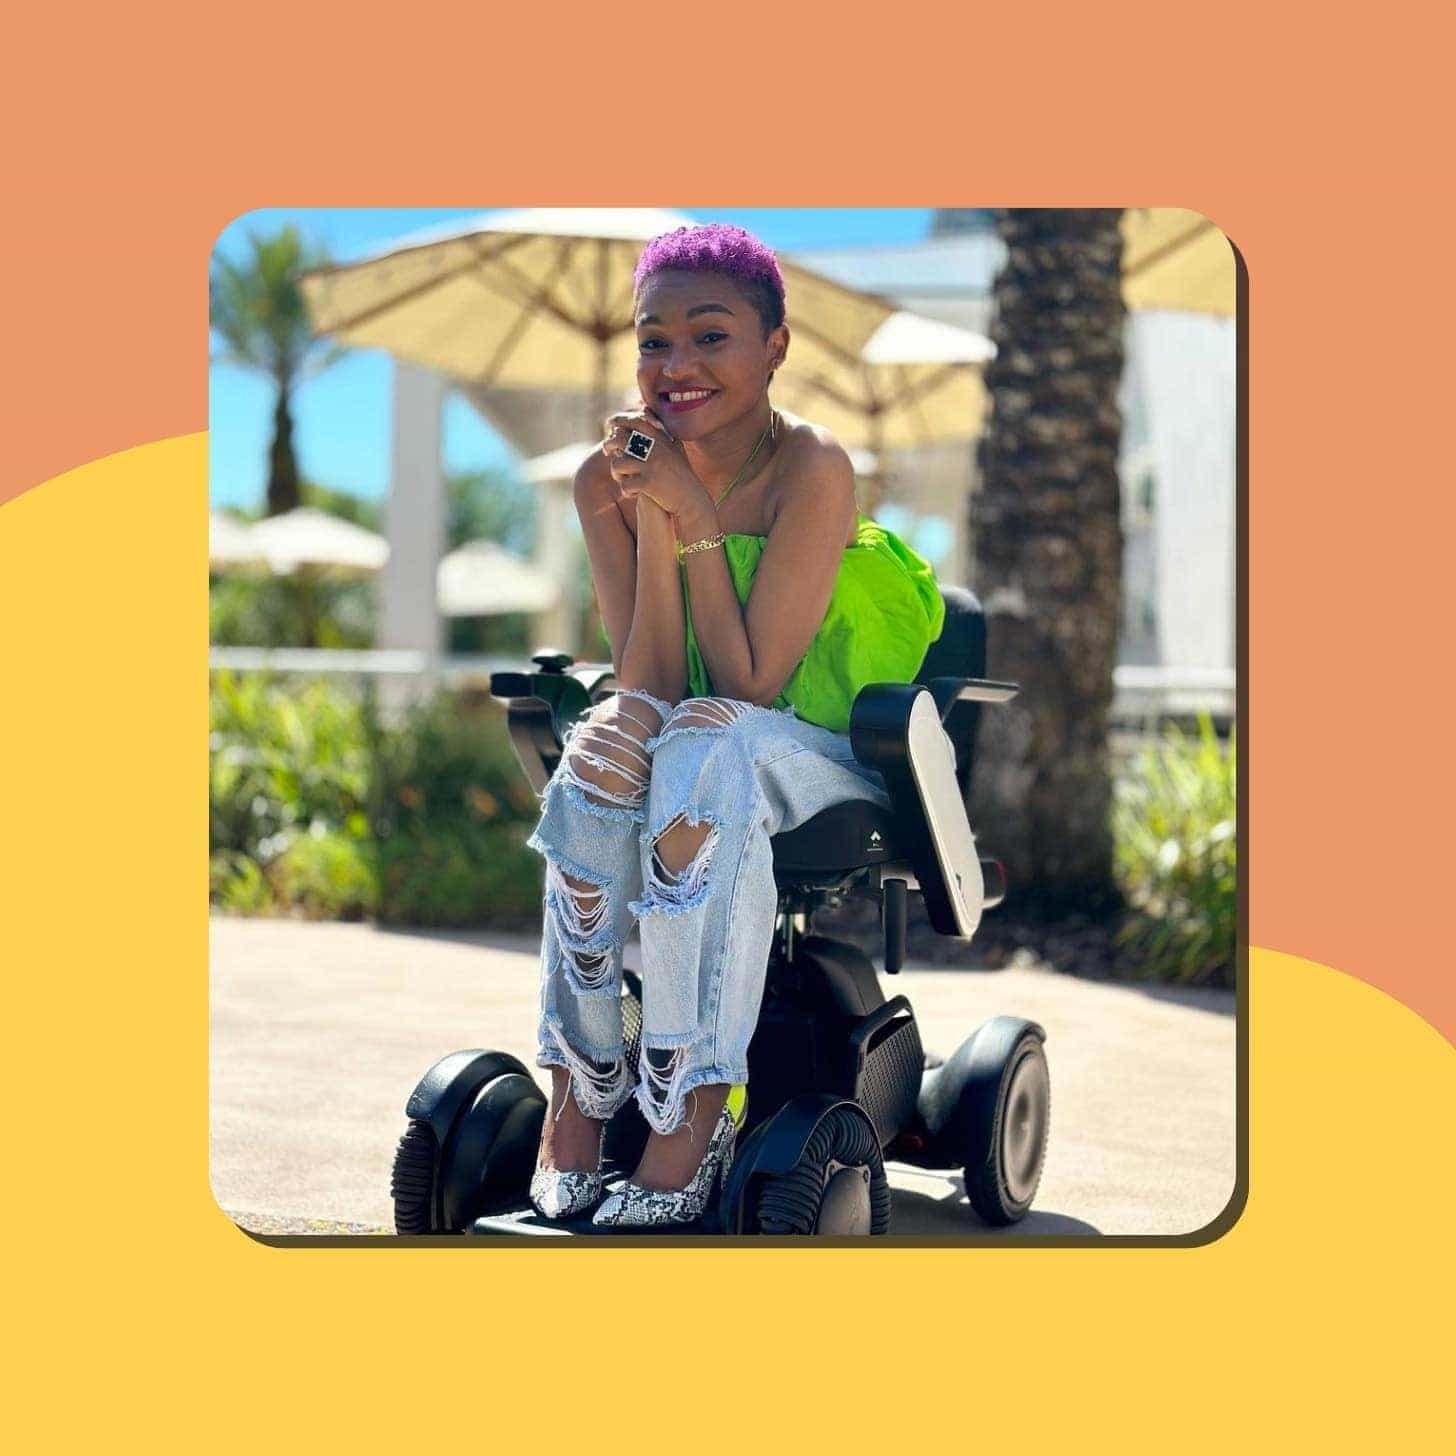 A Black woman with pink hair in trendy ripped jeans and a bright green top smiling in a wheelchair outdoors